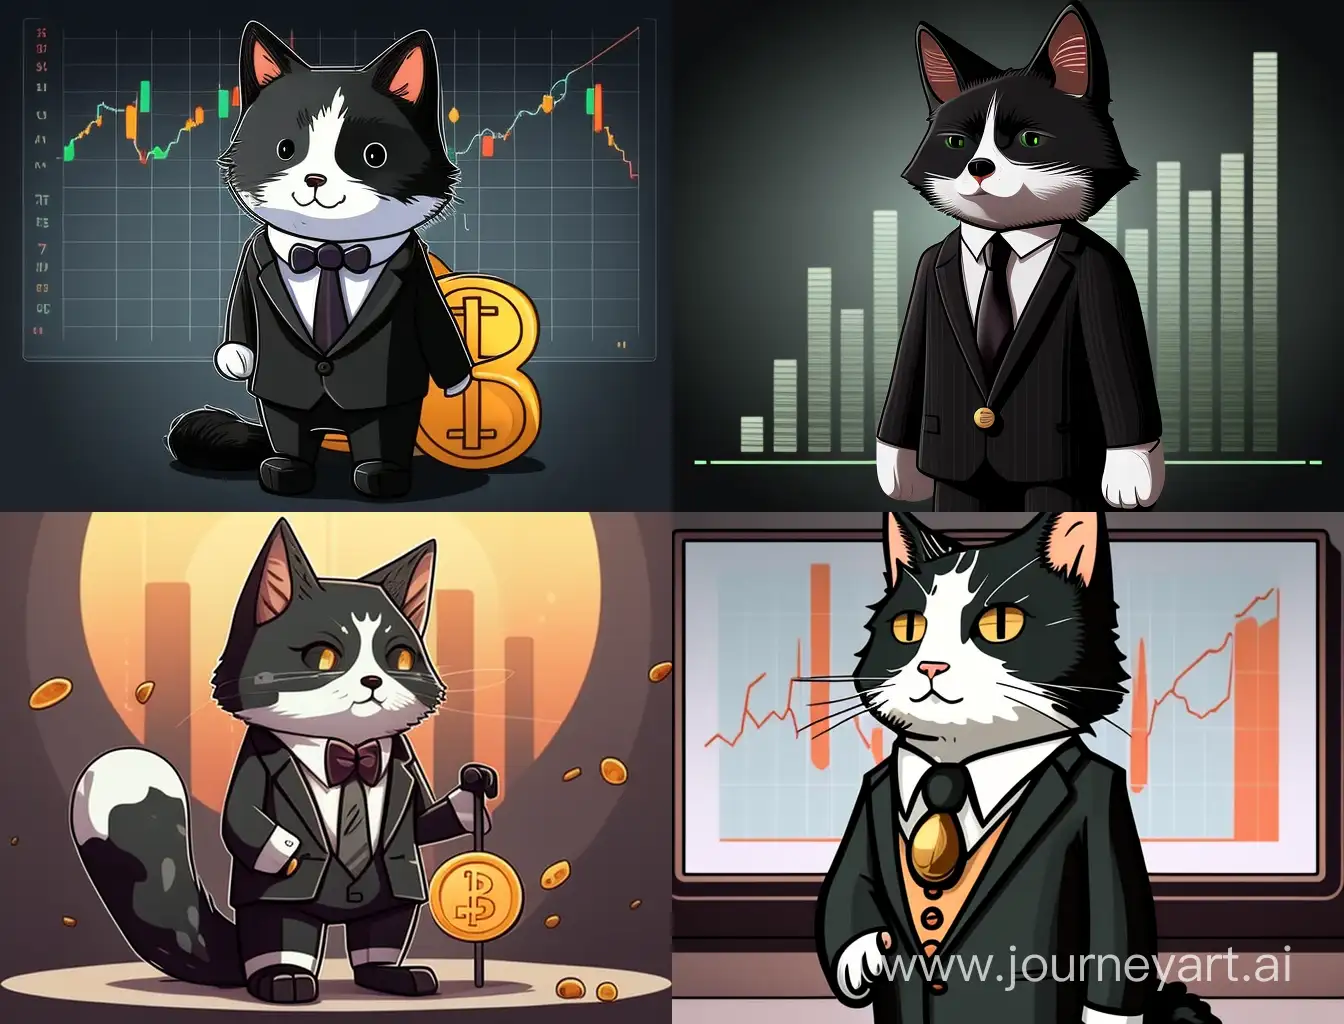 Dapper-Tuxedo-Cat-Engages-with-Bitcoin-and-Trading-Chart